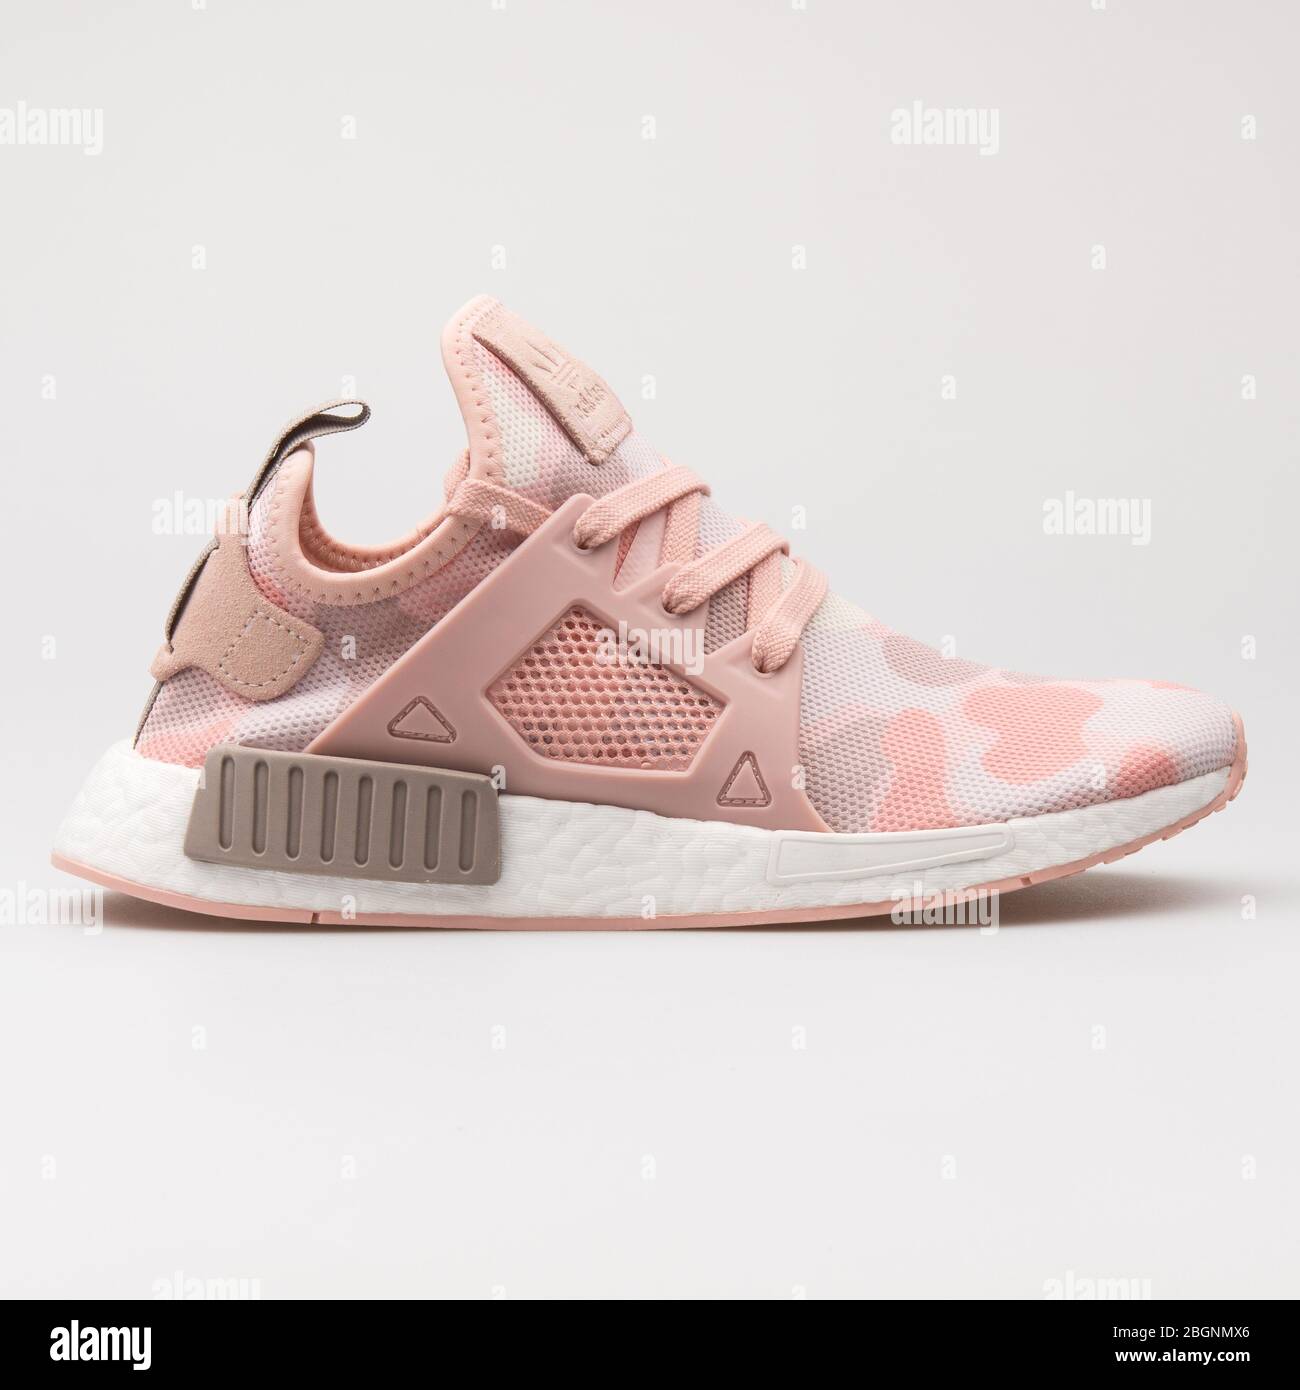 Adidas NMD XR1 pink and white camo 